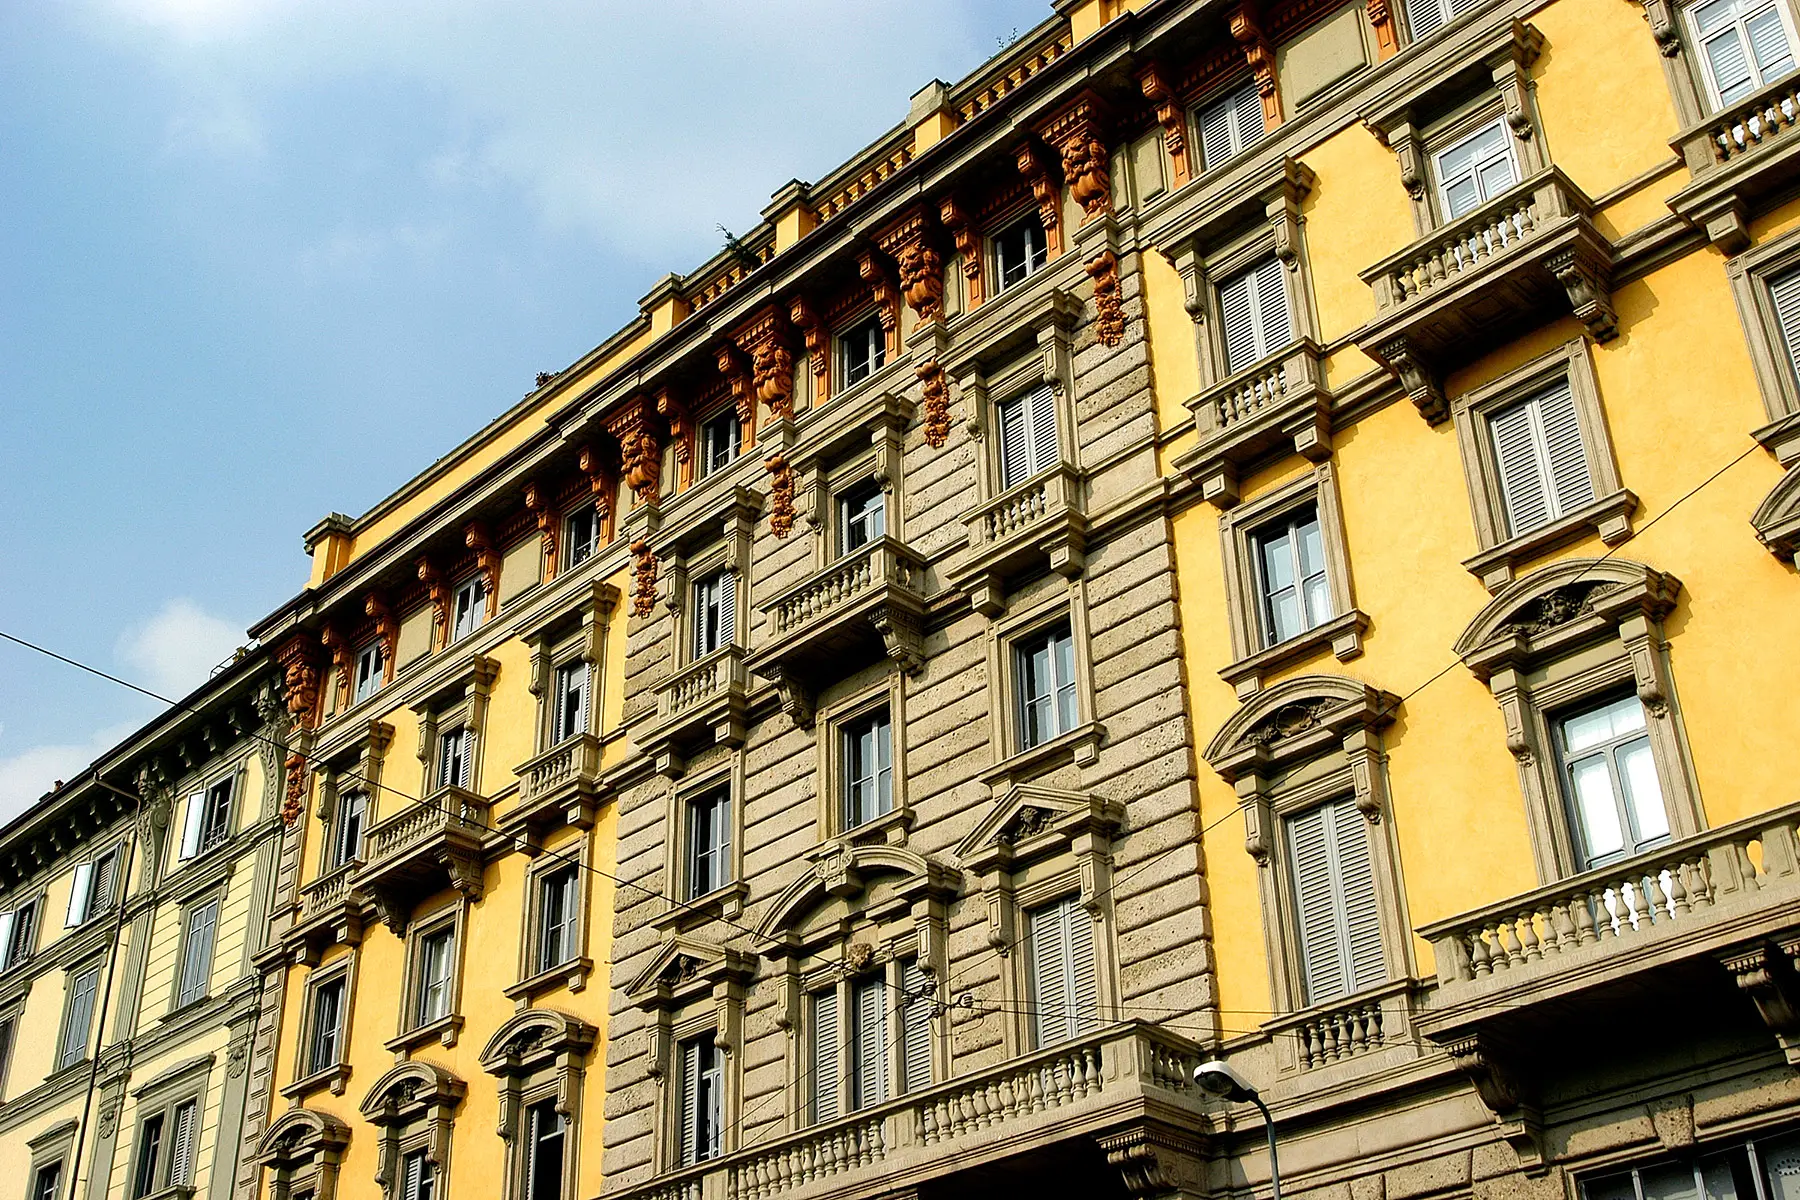 Old-fashioned yellow and beige apartment buildings in Porta Venezia, Milan